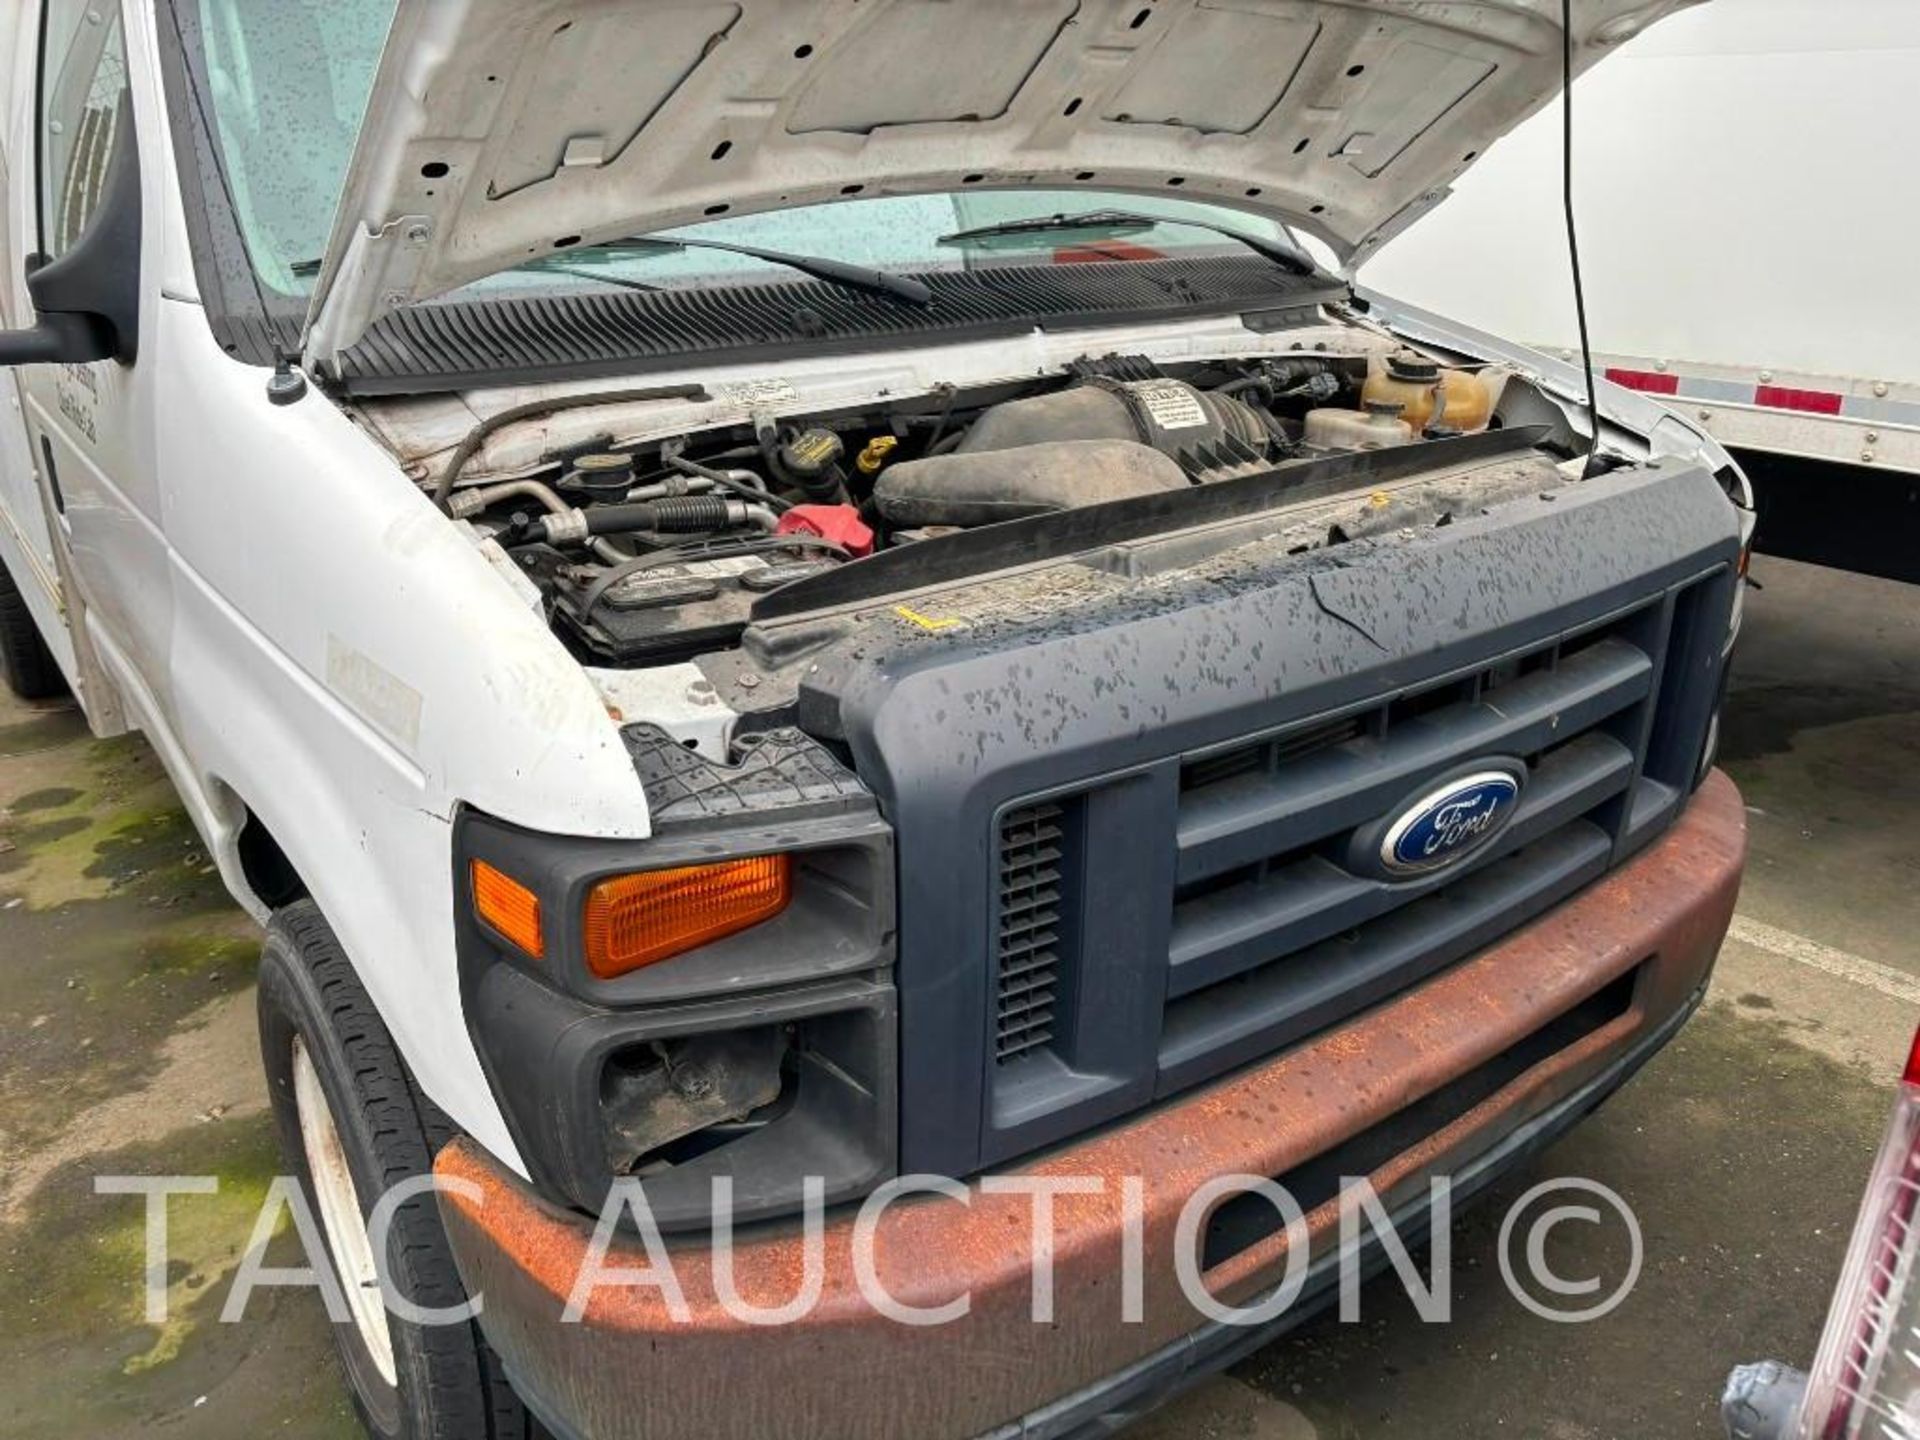 2015 Ford E-350 12ft Box Truck - Image 17 of 68